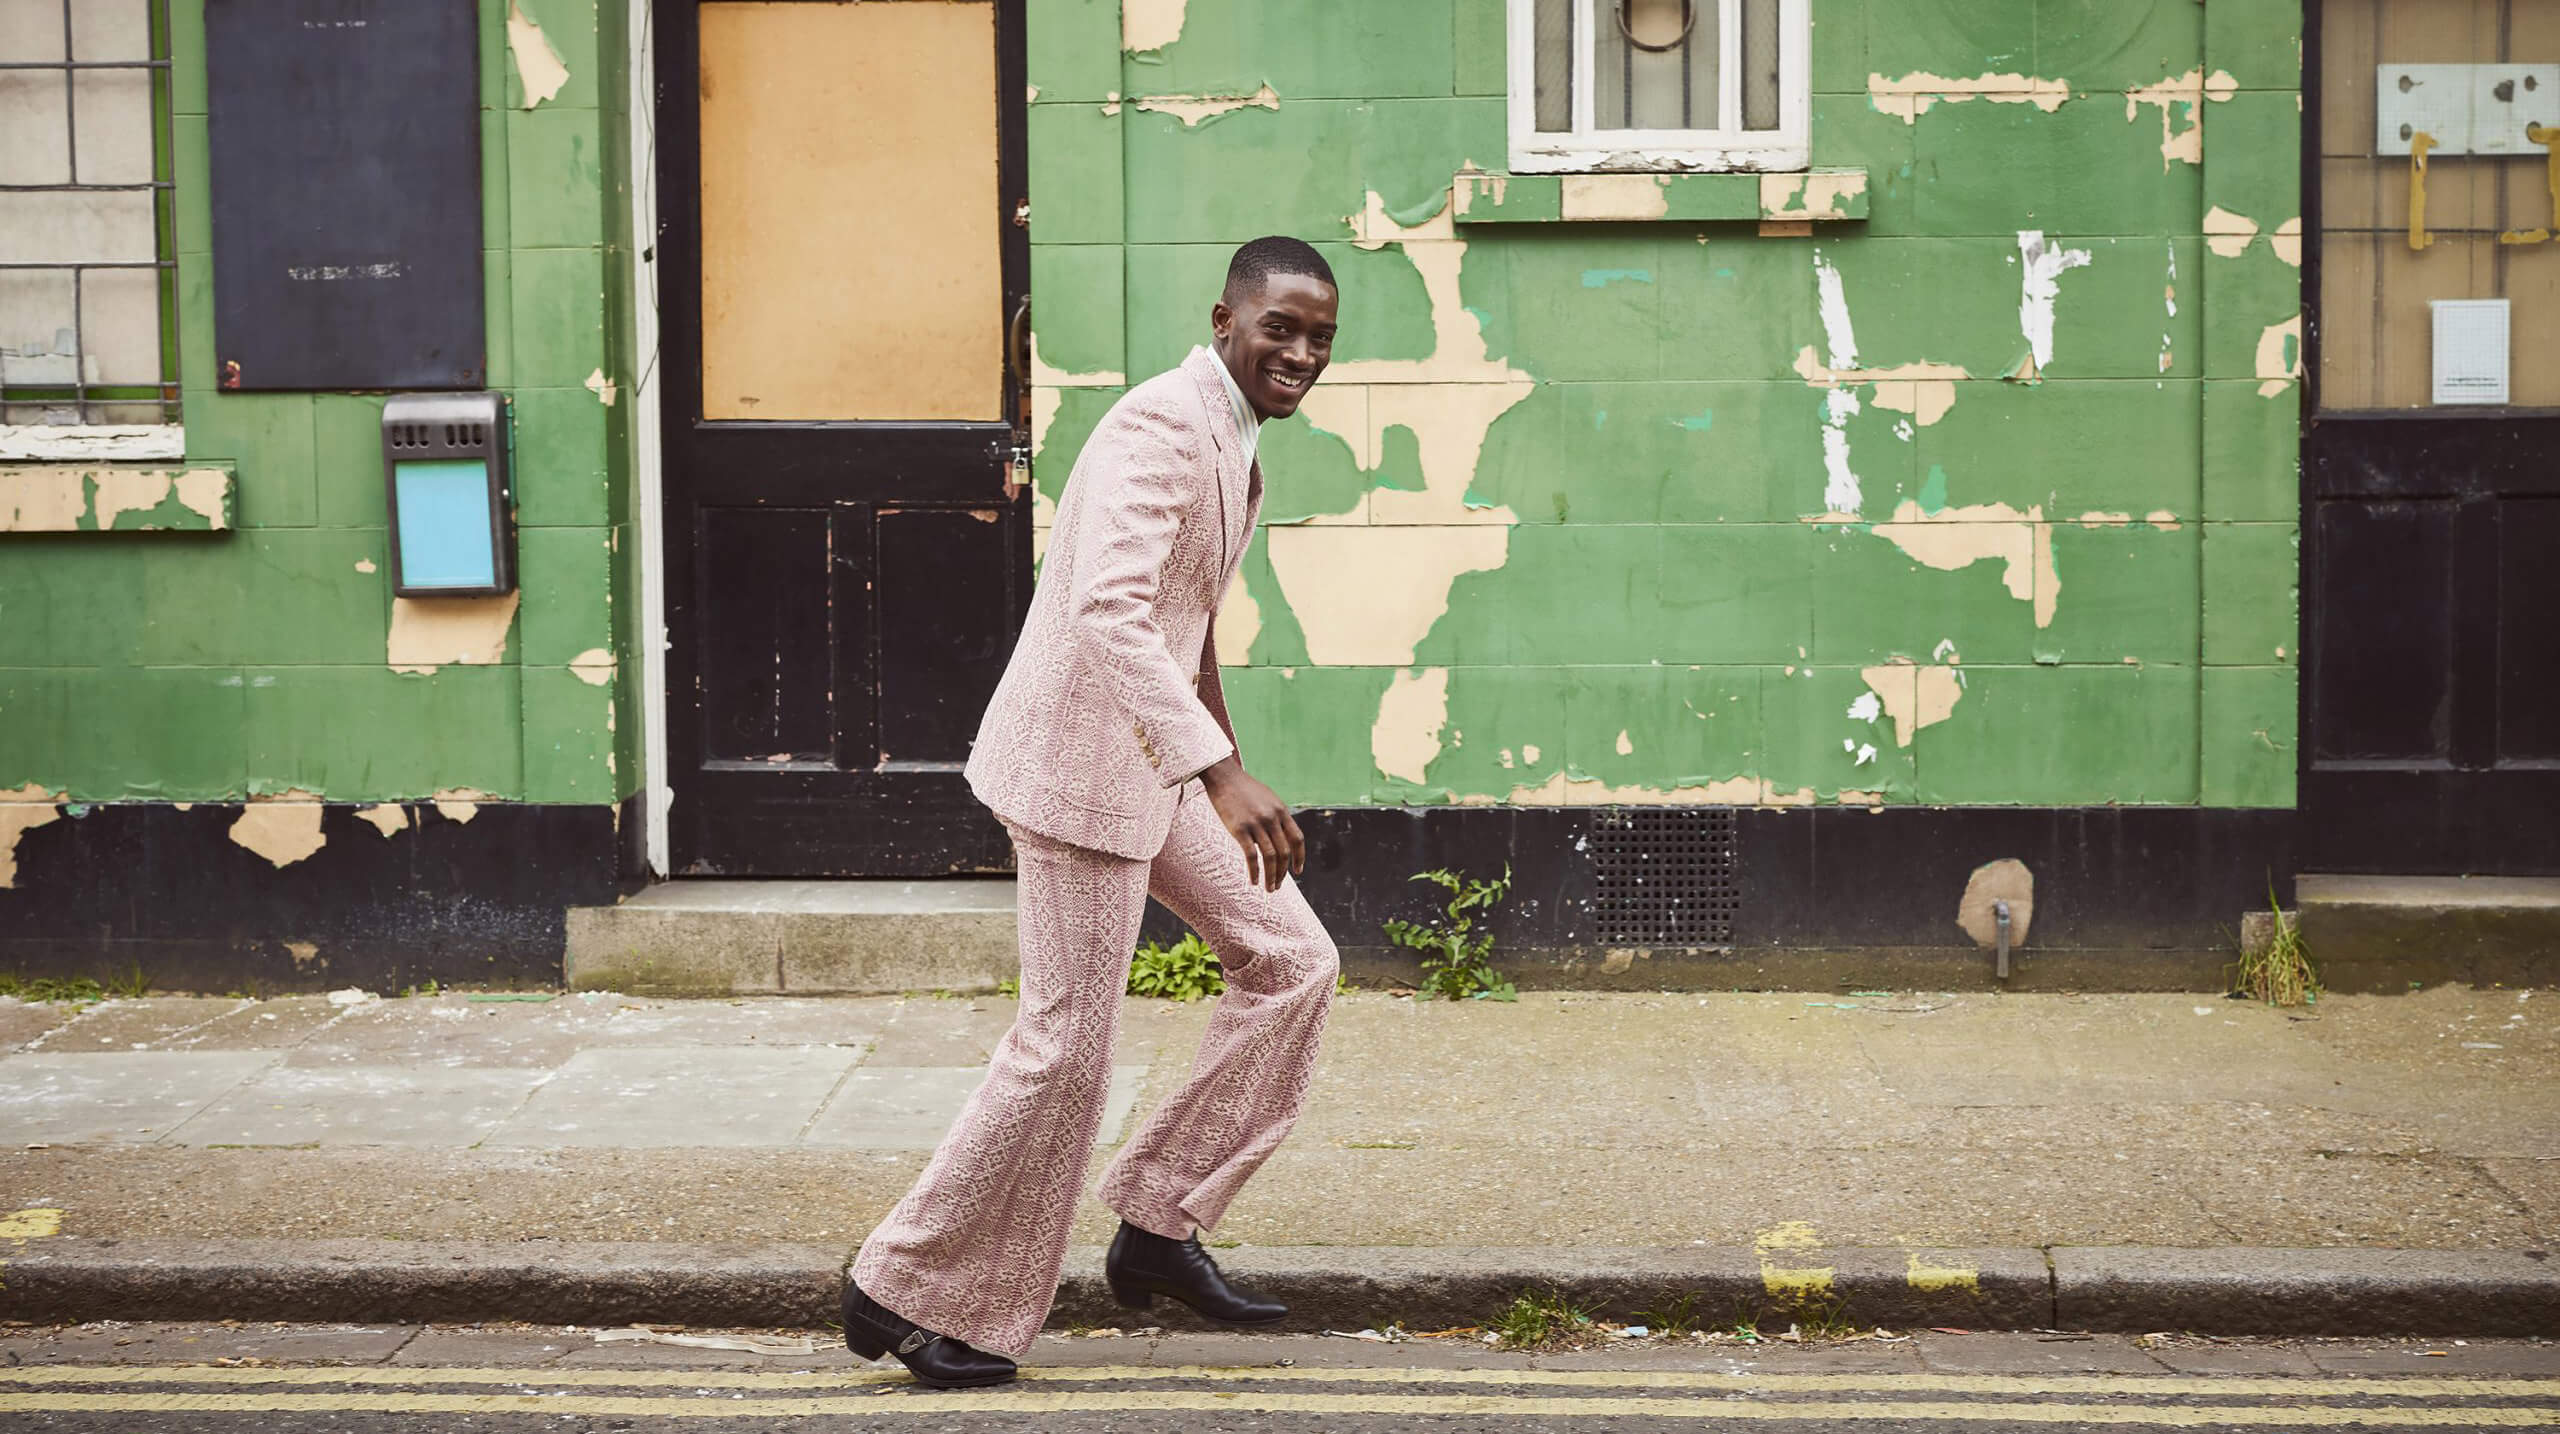 Damson Idris smiling while walking on the road by a flaking green painted wall